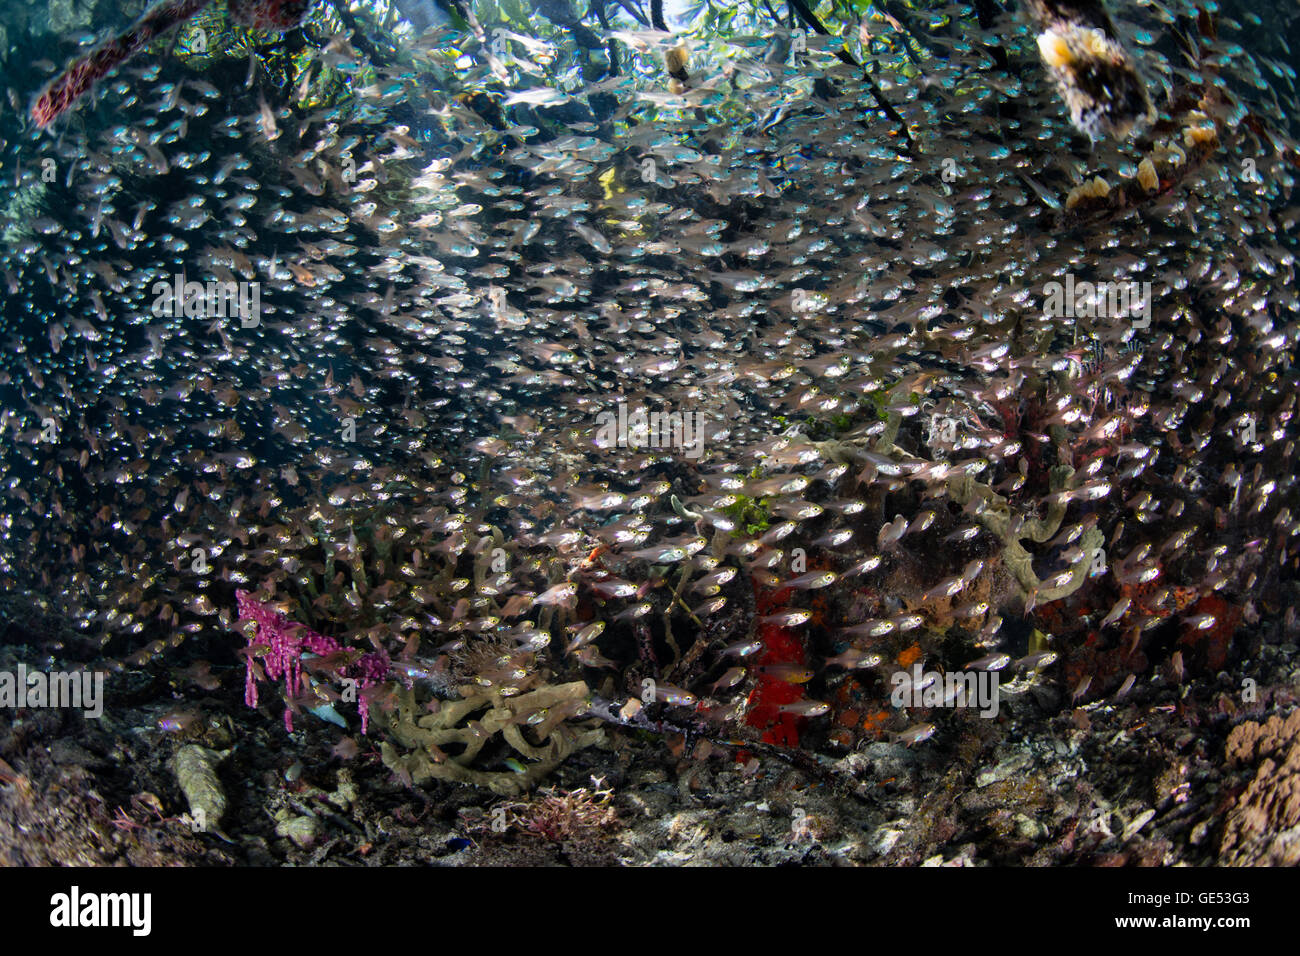 Tiny fish swarm along the edge of a mangrove forest in Raja Ampat, Indonesia. Mangroves serve as nurseries for many species. Stock Photo